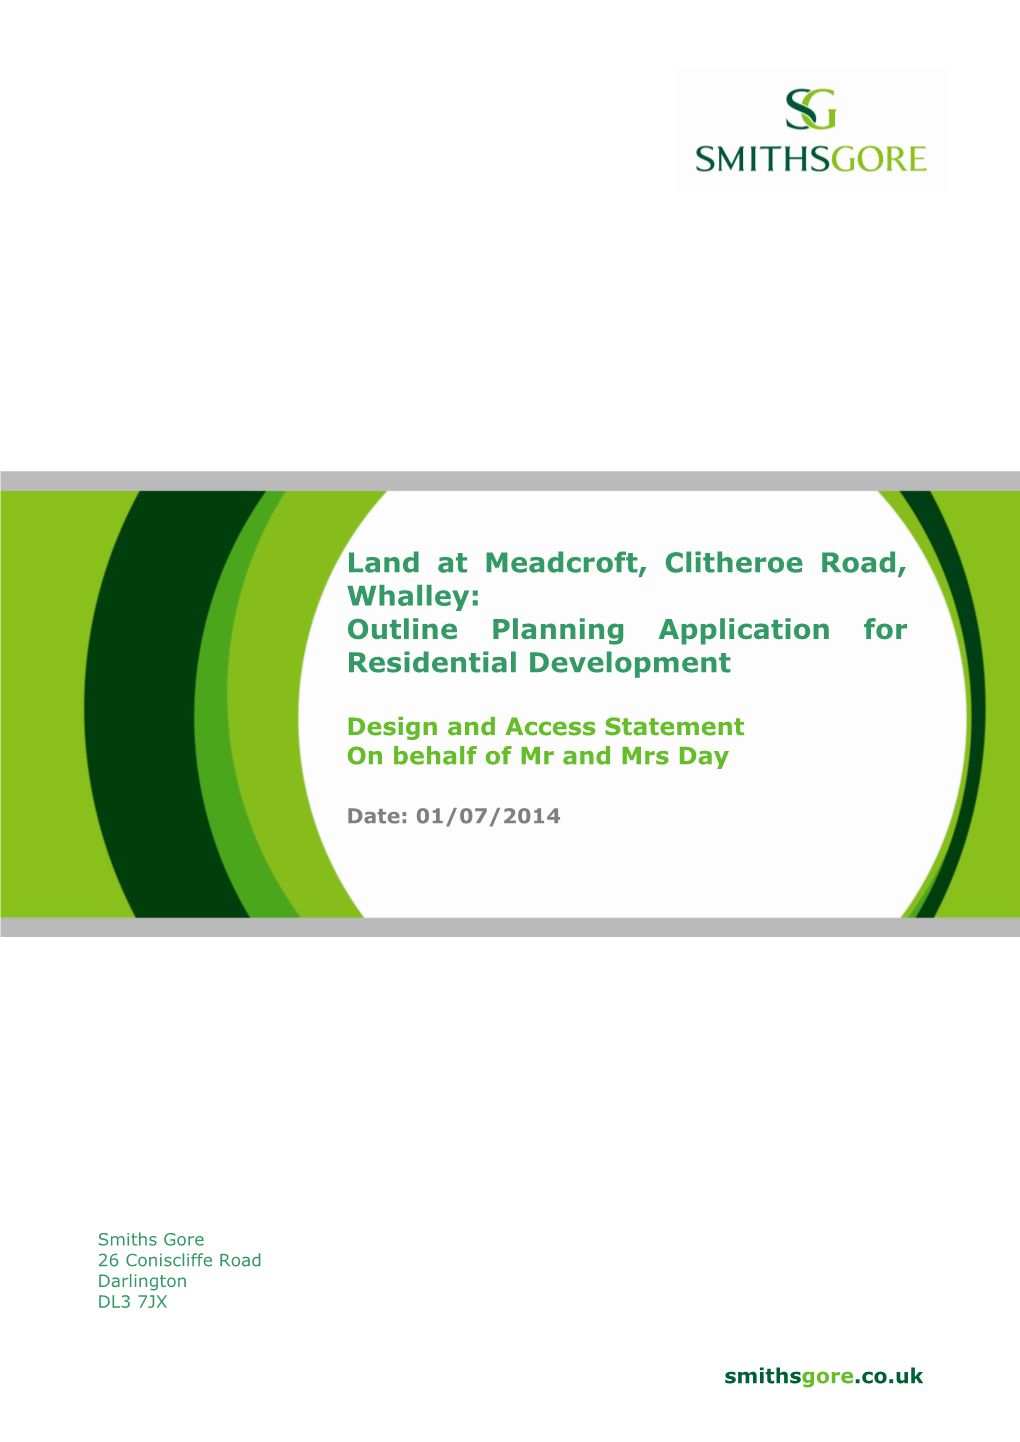 Land at Meadcroft, Clitheroe Road, Whalley